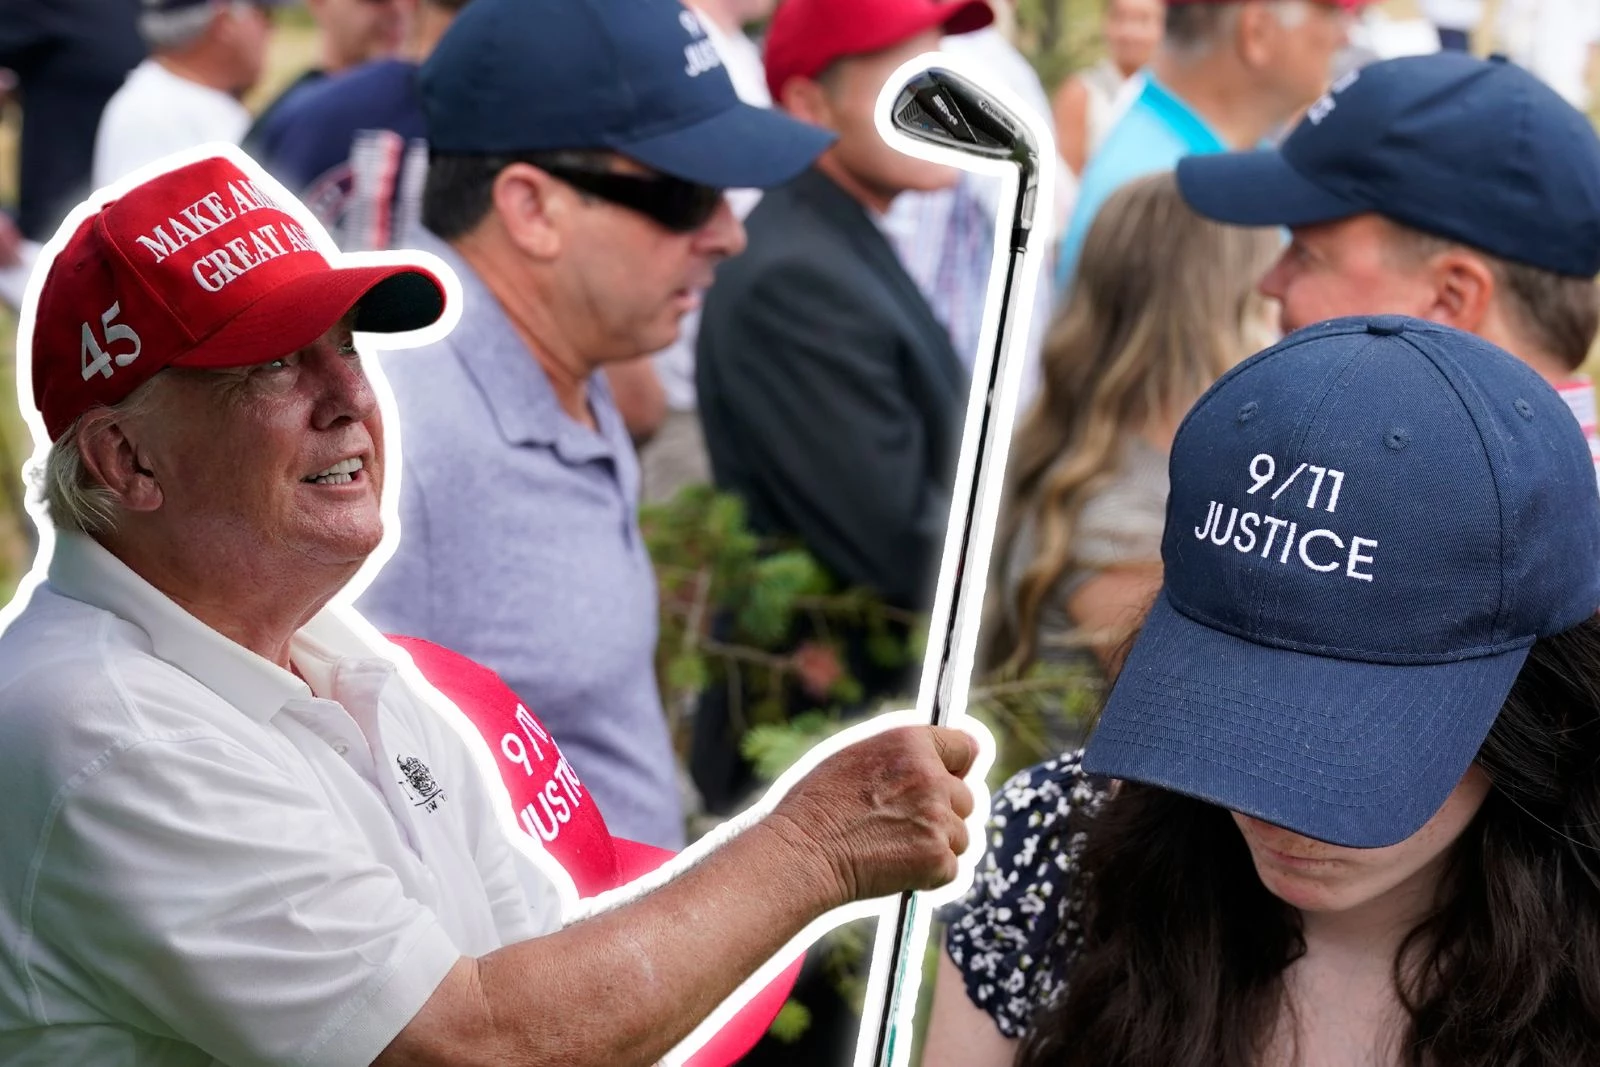 PHOTOS: Crowd gathers to protest tour at Trump's NJ golf course